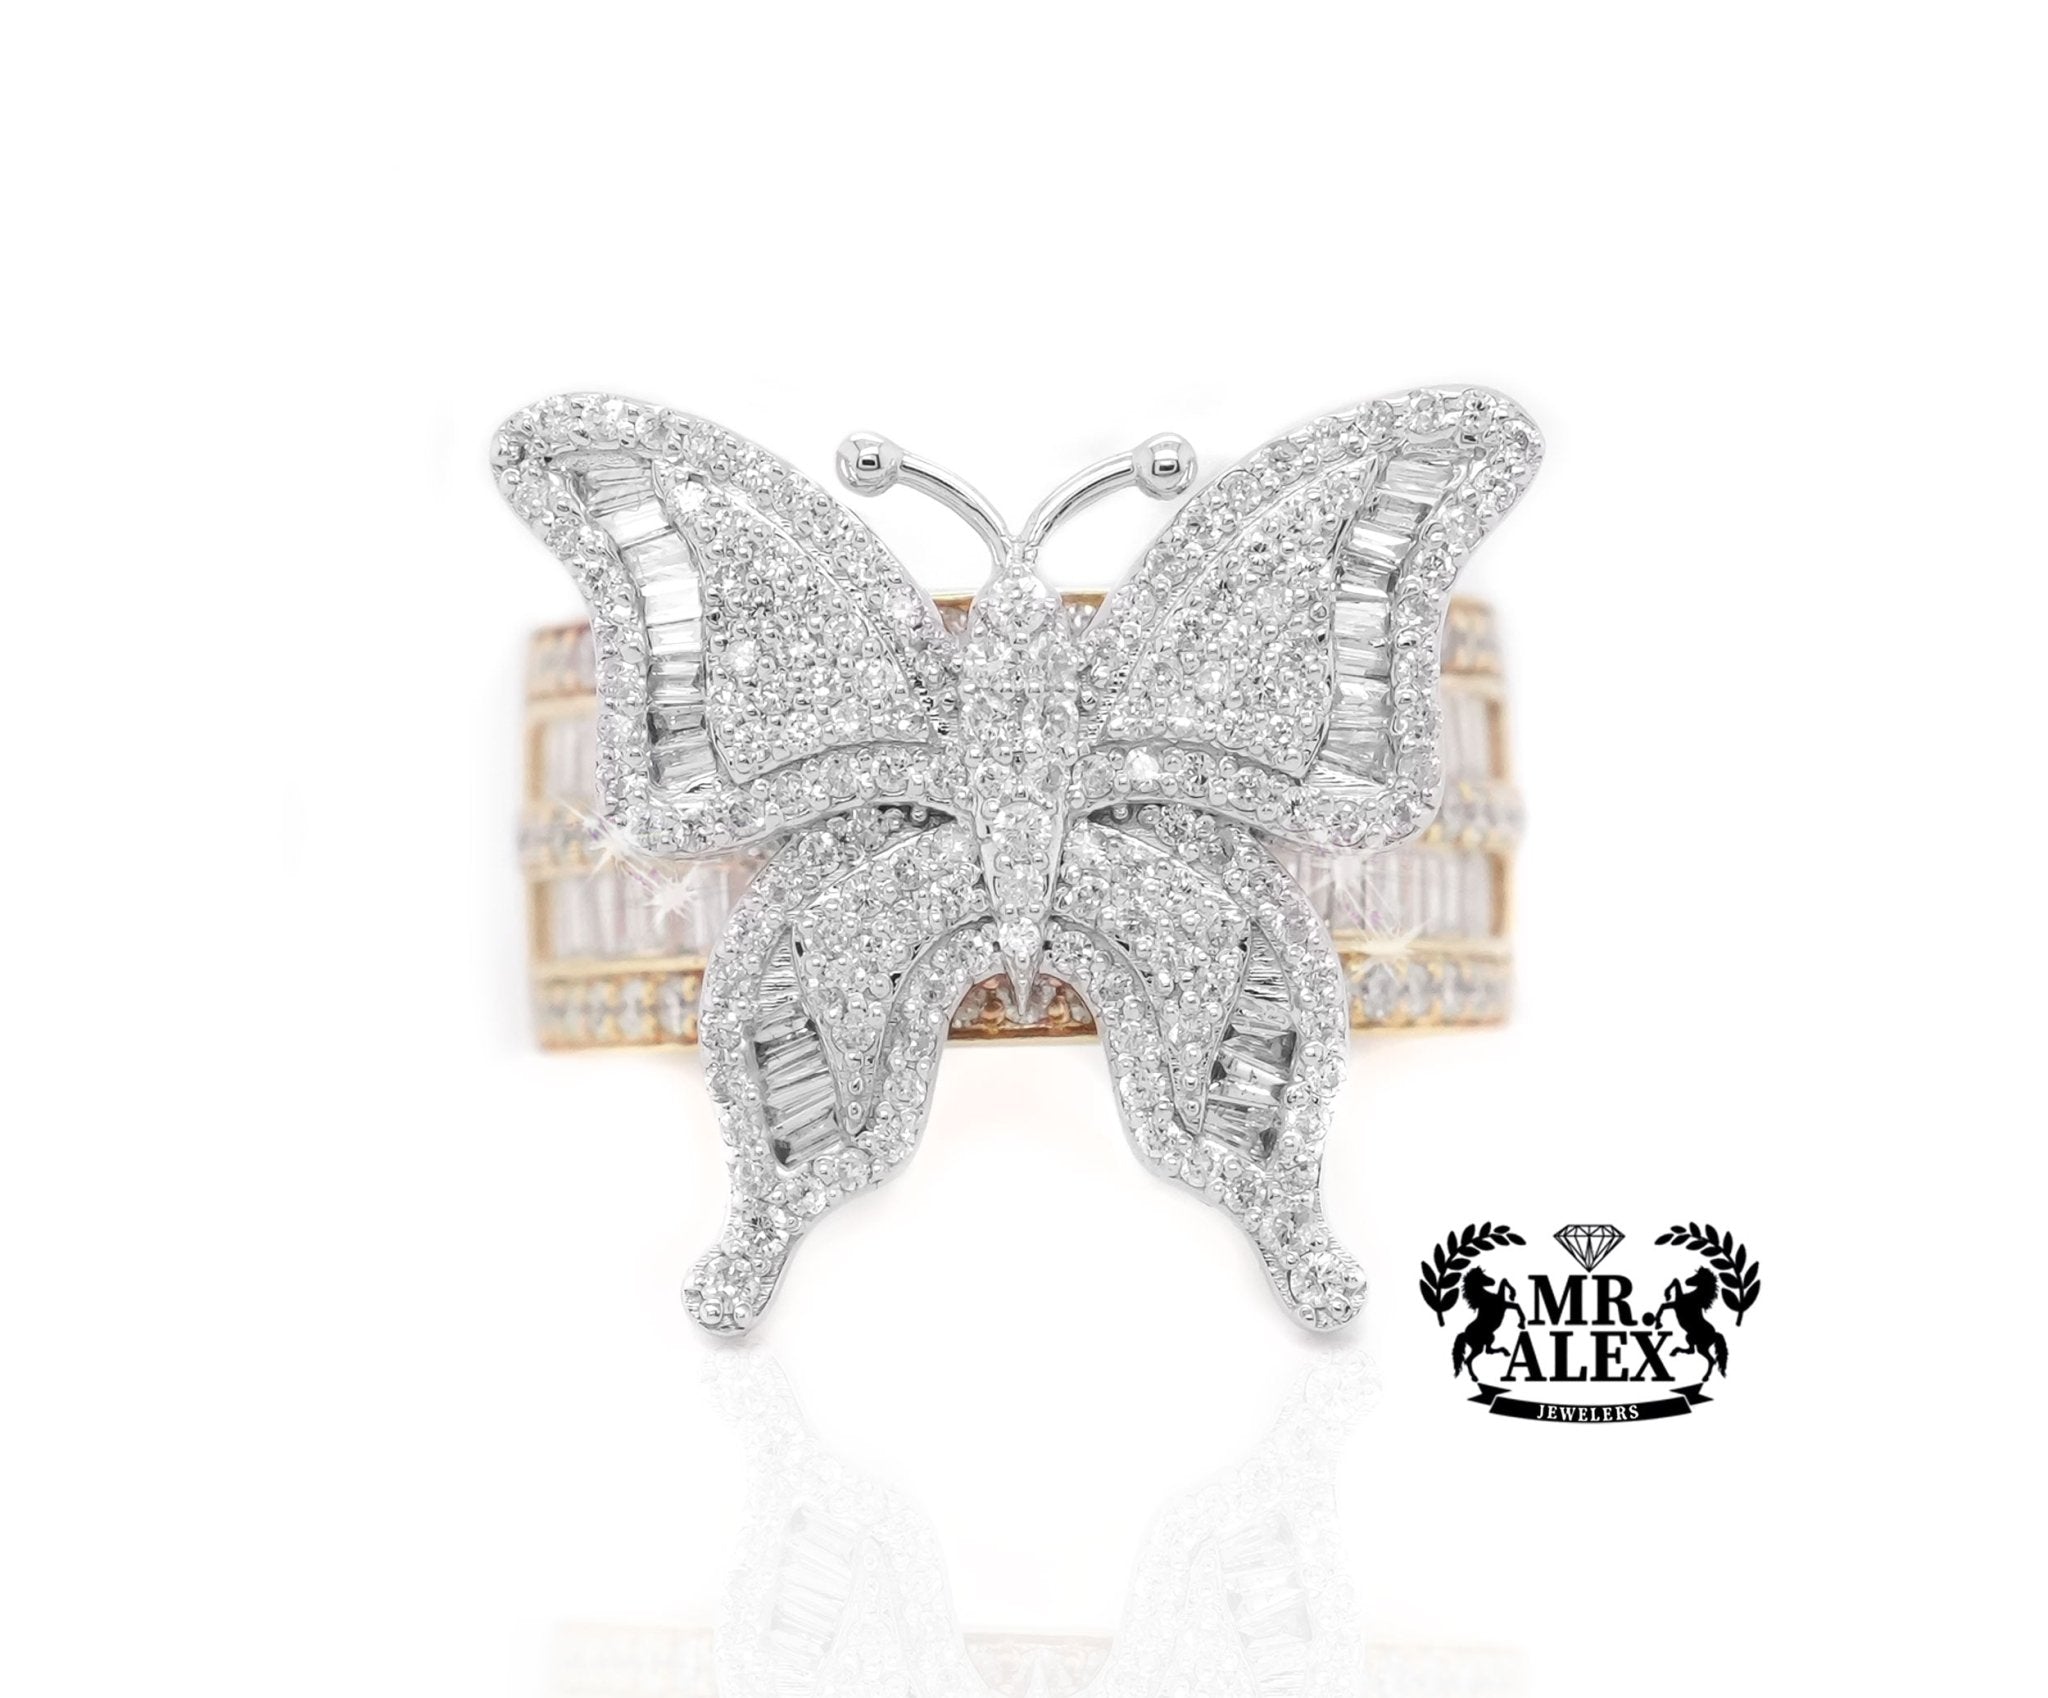 10K Gold Grand Butterfly Ring with Diamond Baguettes 1.70ct - Mr. Alex Jewelry